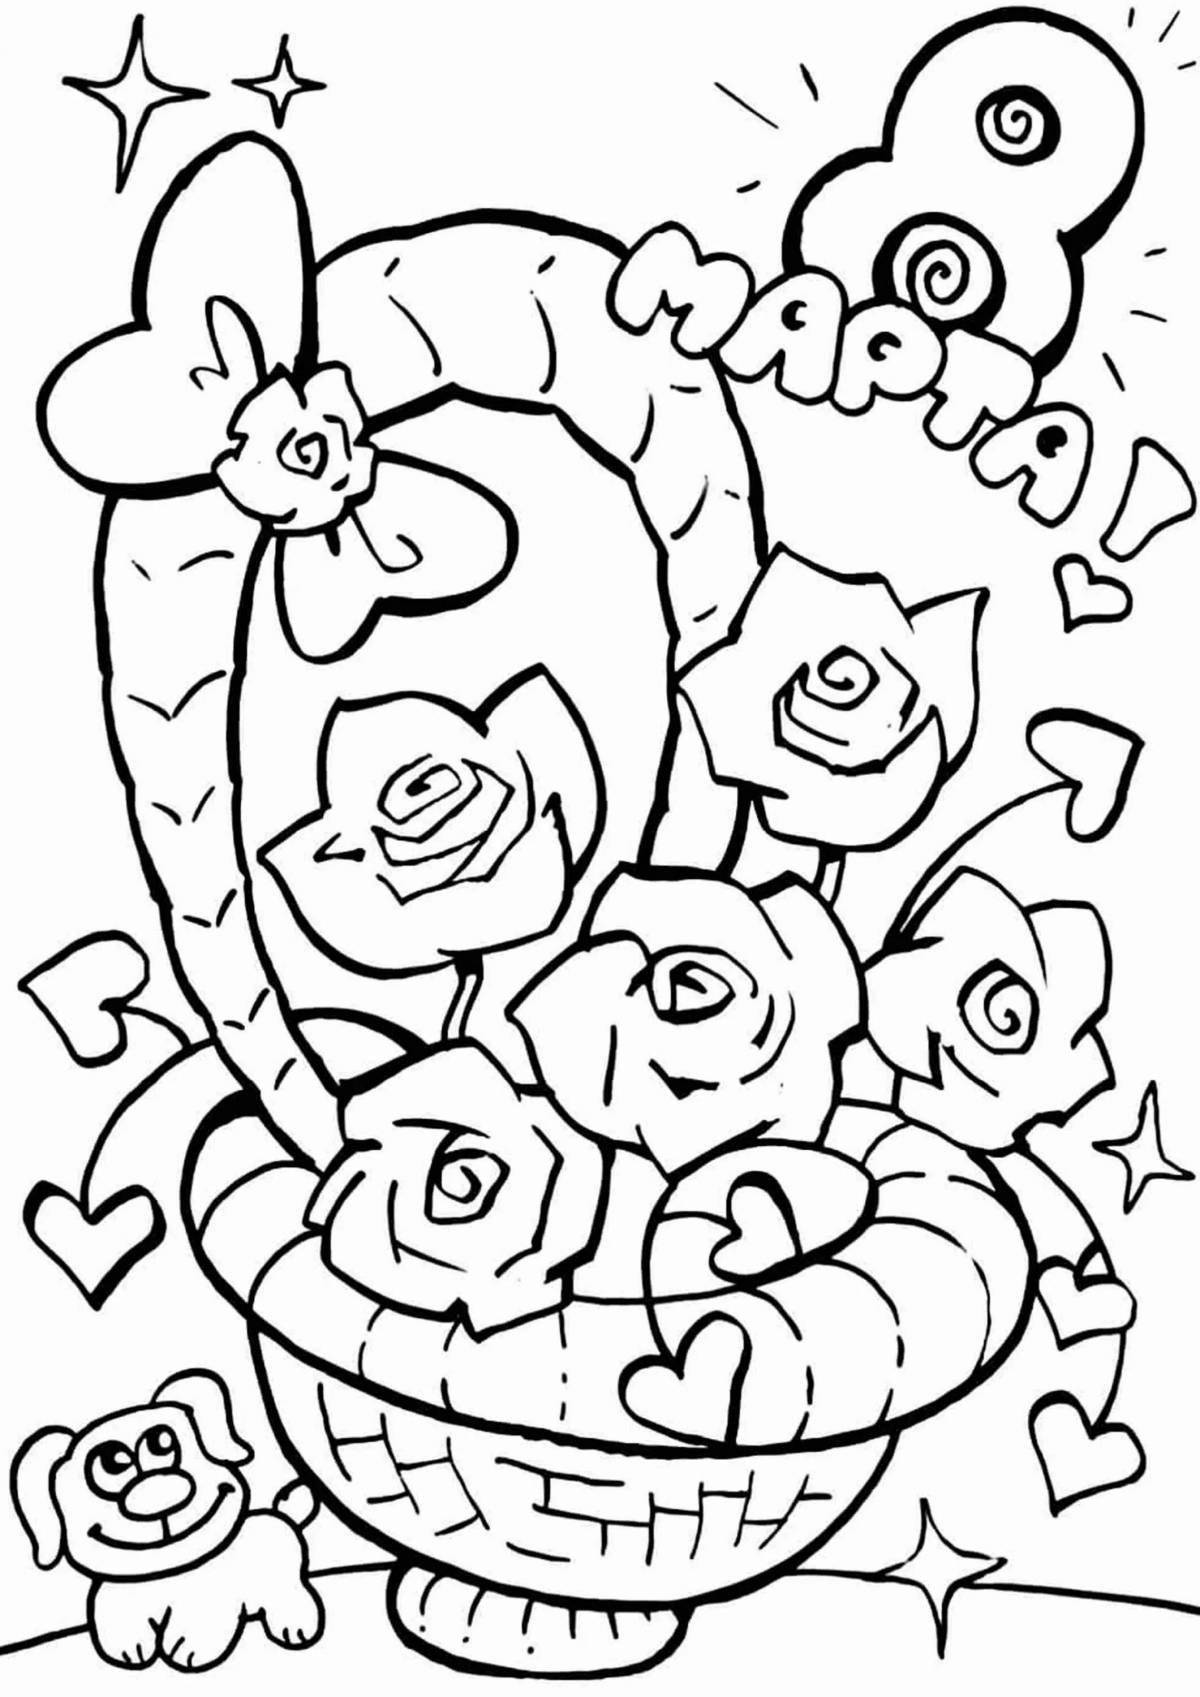 Happy coloring flowers March 8